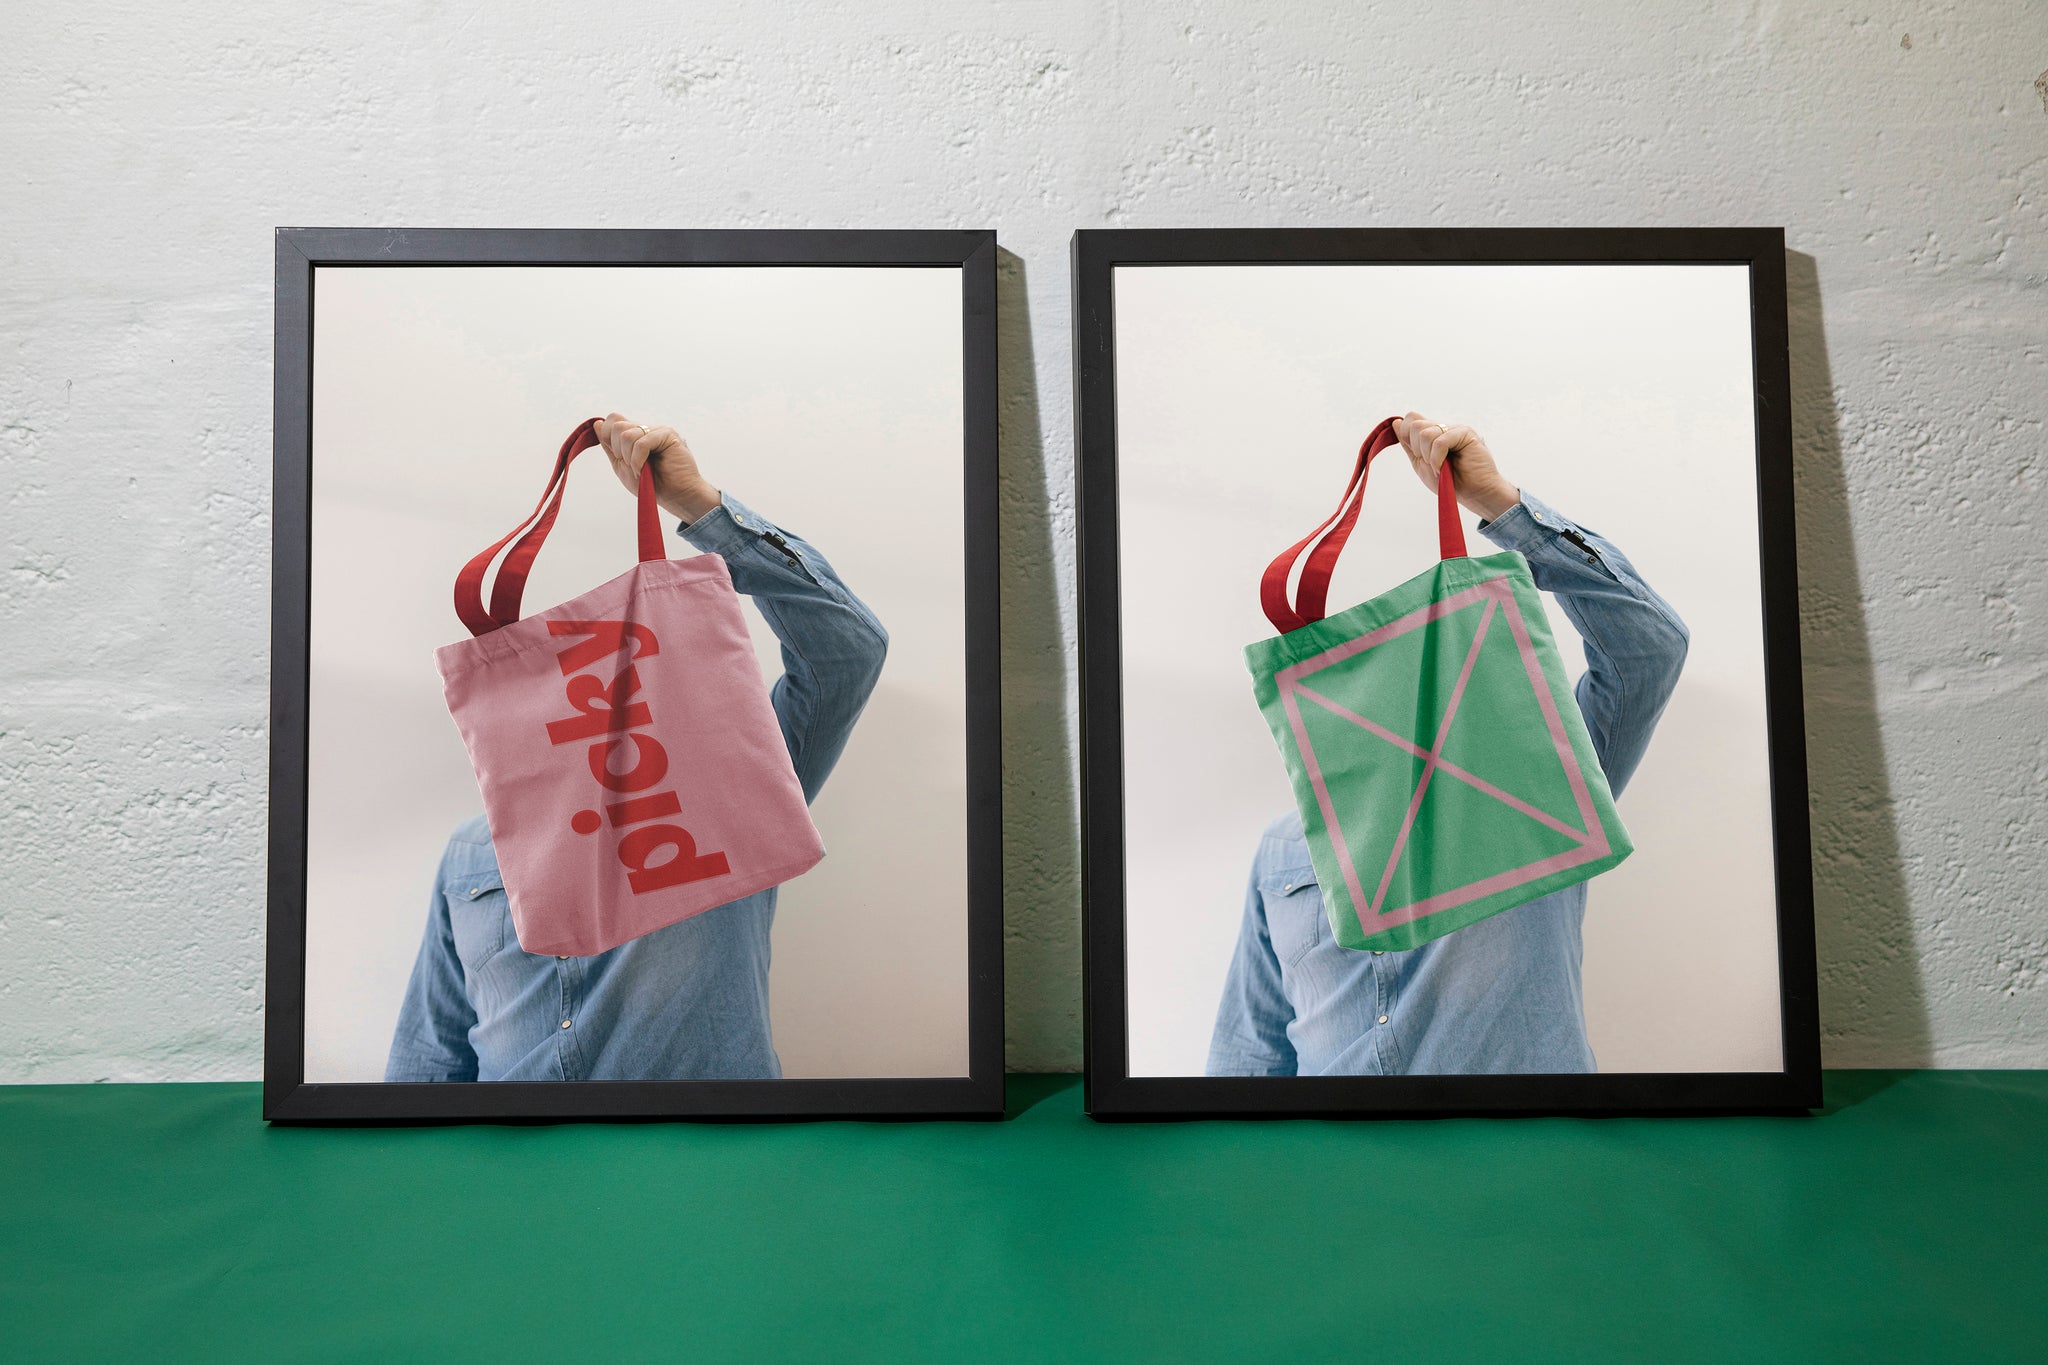 Landscape close-up of two black photo frames in front of a white backdrop. Framed is a person in a denim shirt holding pink and green picky branded tote bags.